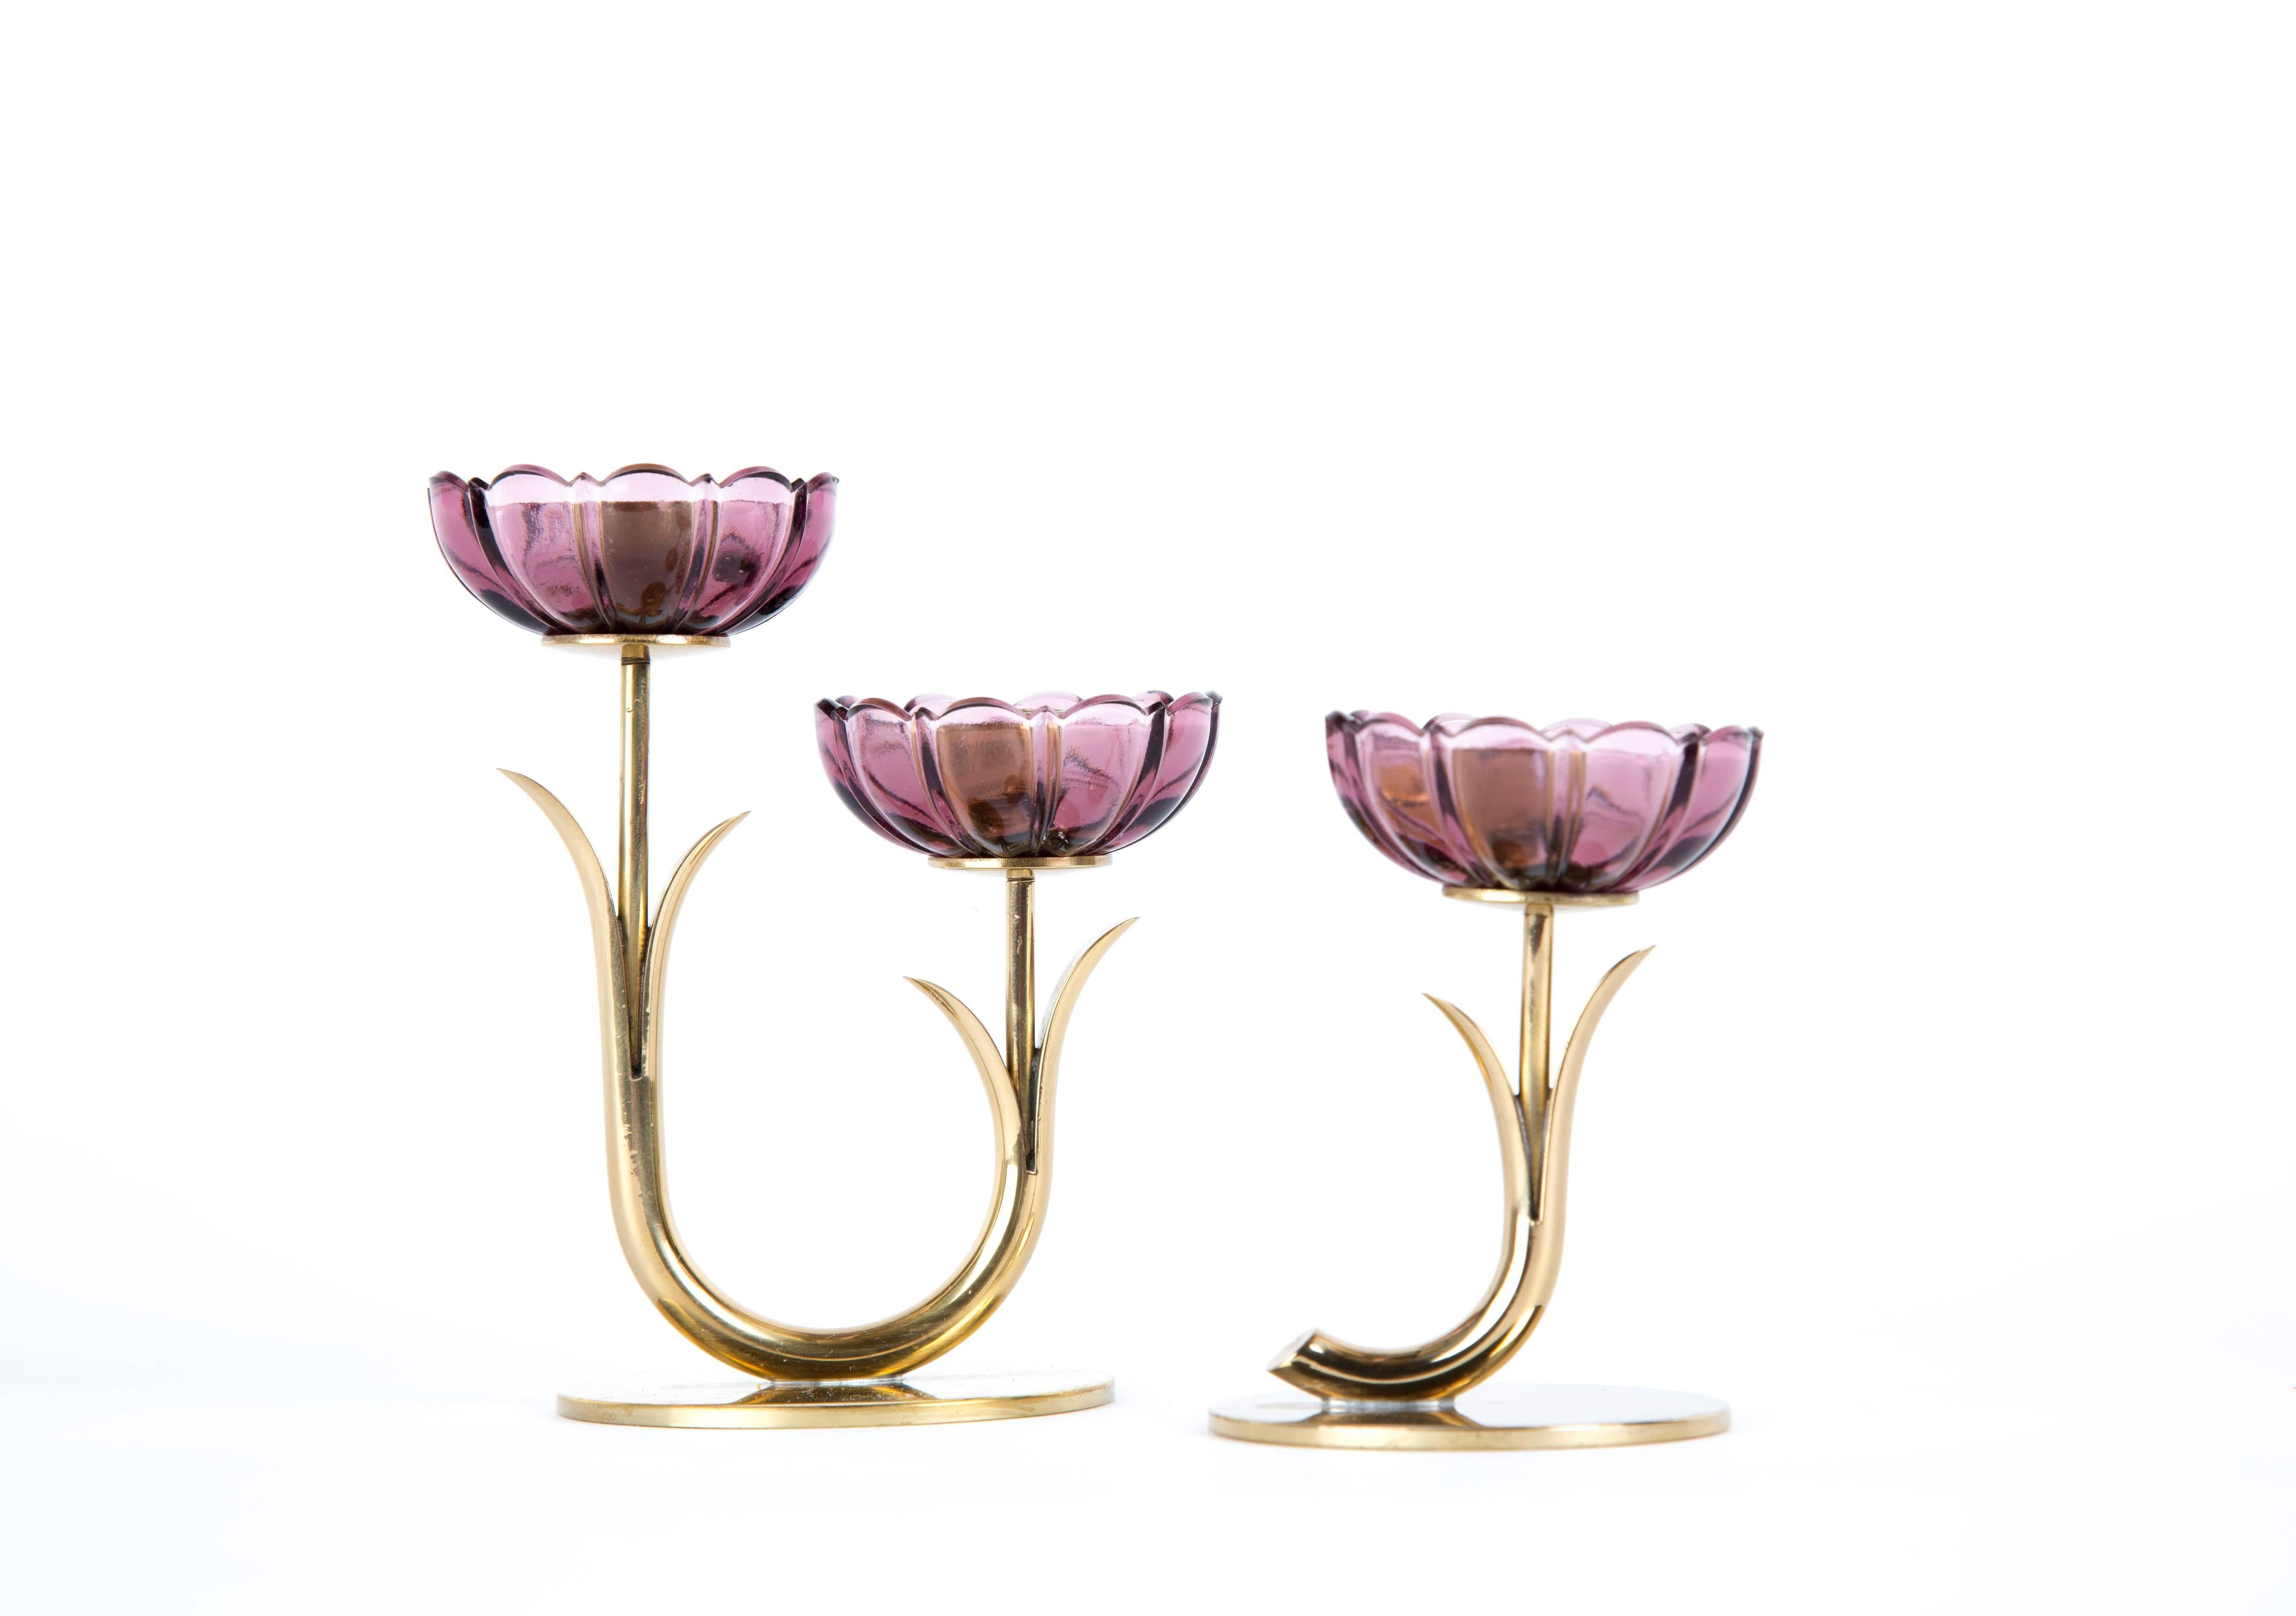 A set of two Gunnar Ander candle holders. Dark pink art-glass. A double and a single candle holder. Signed on the bottom.